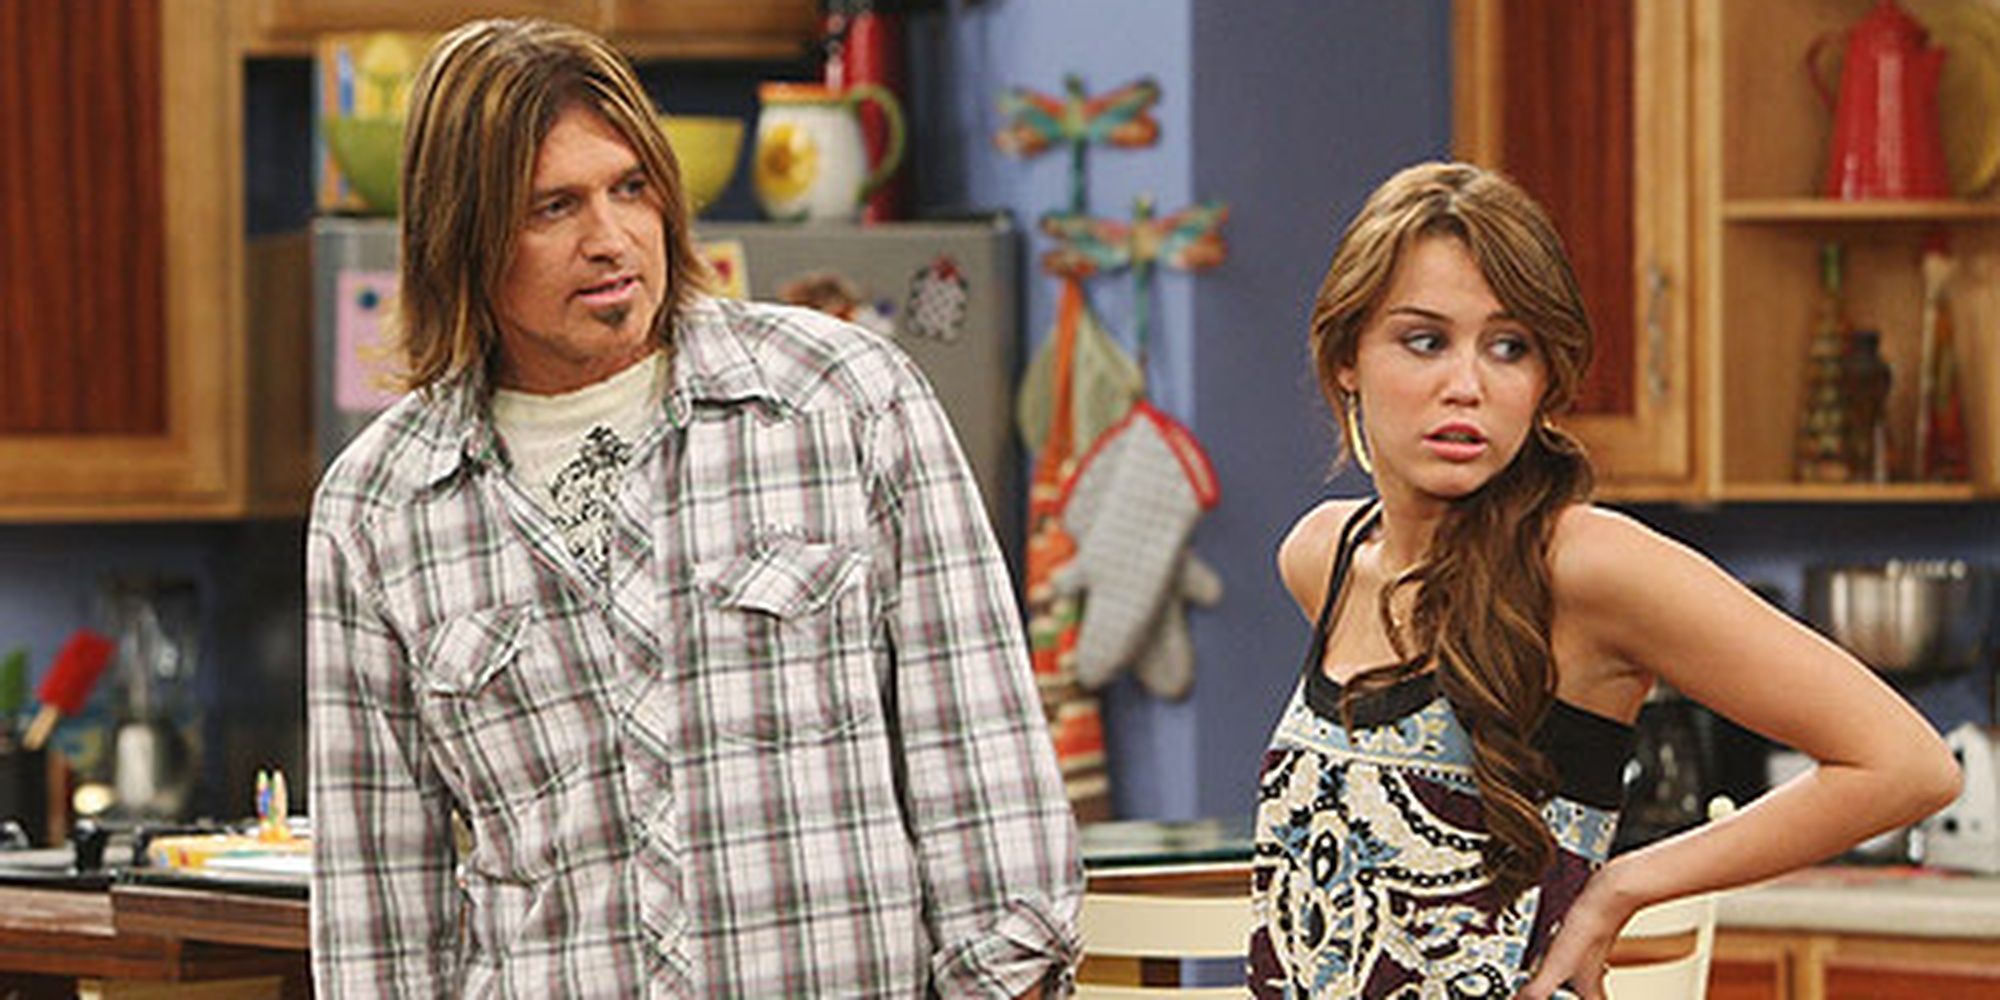 5 Best Parents on Disney Channel Original Series (And 5 Who Weren’t So Great)